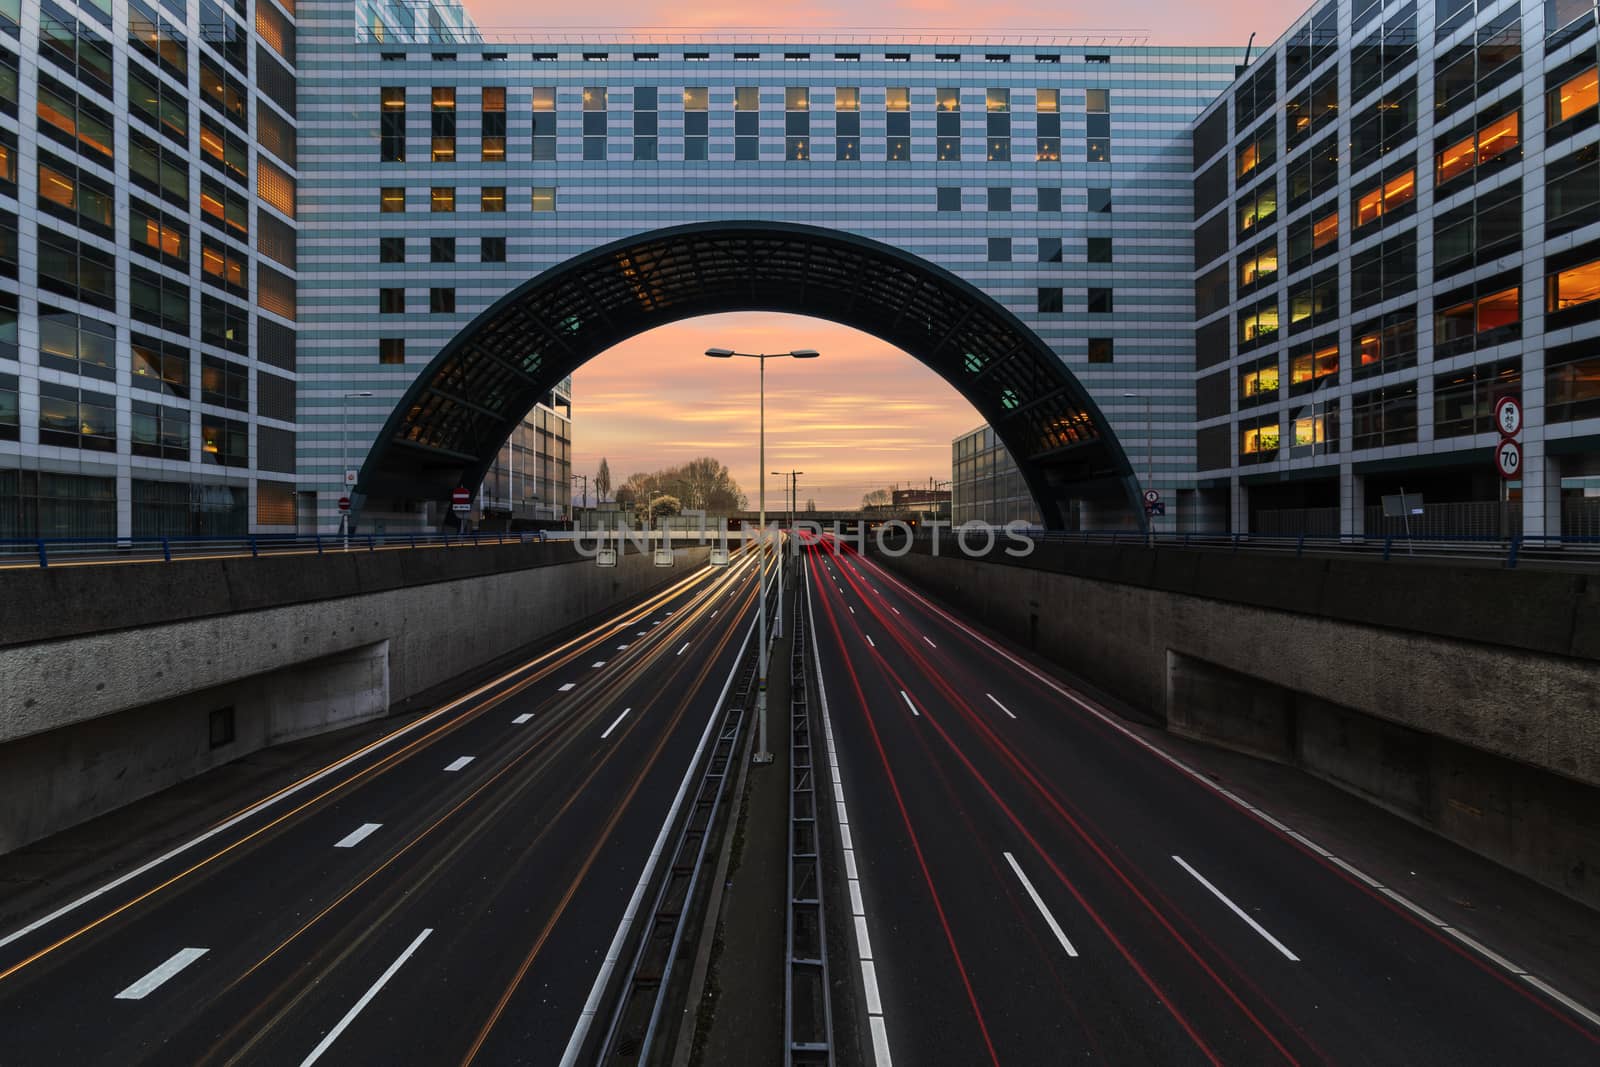 Buildings over the end of A12 highway entering inside The Hague city during the blue hours, Netherlands by ankorlight